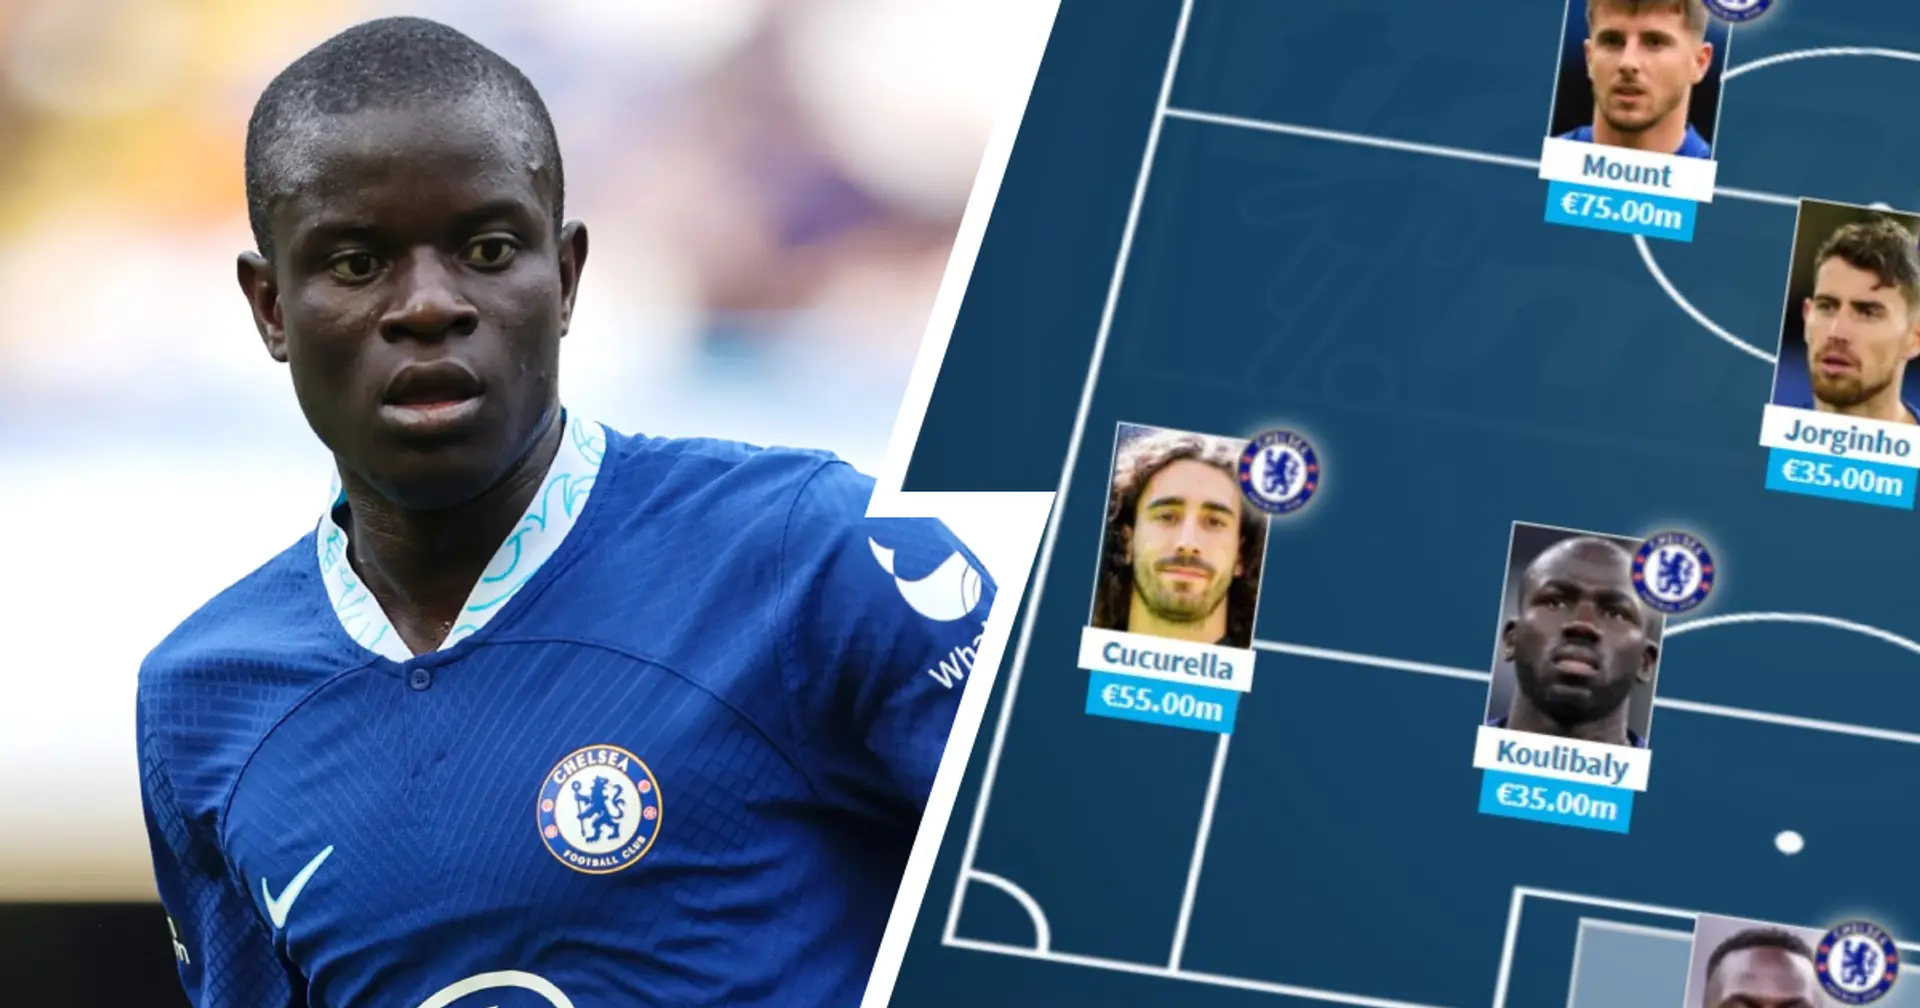 Chelsea's most expensive starting XI revealed: Cucurella in, Kante out